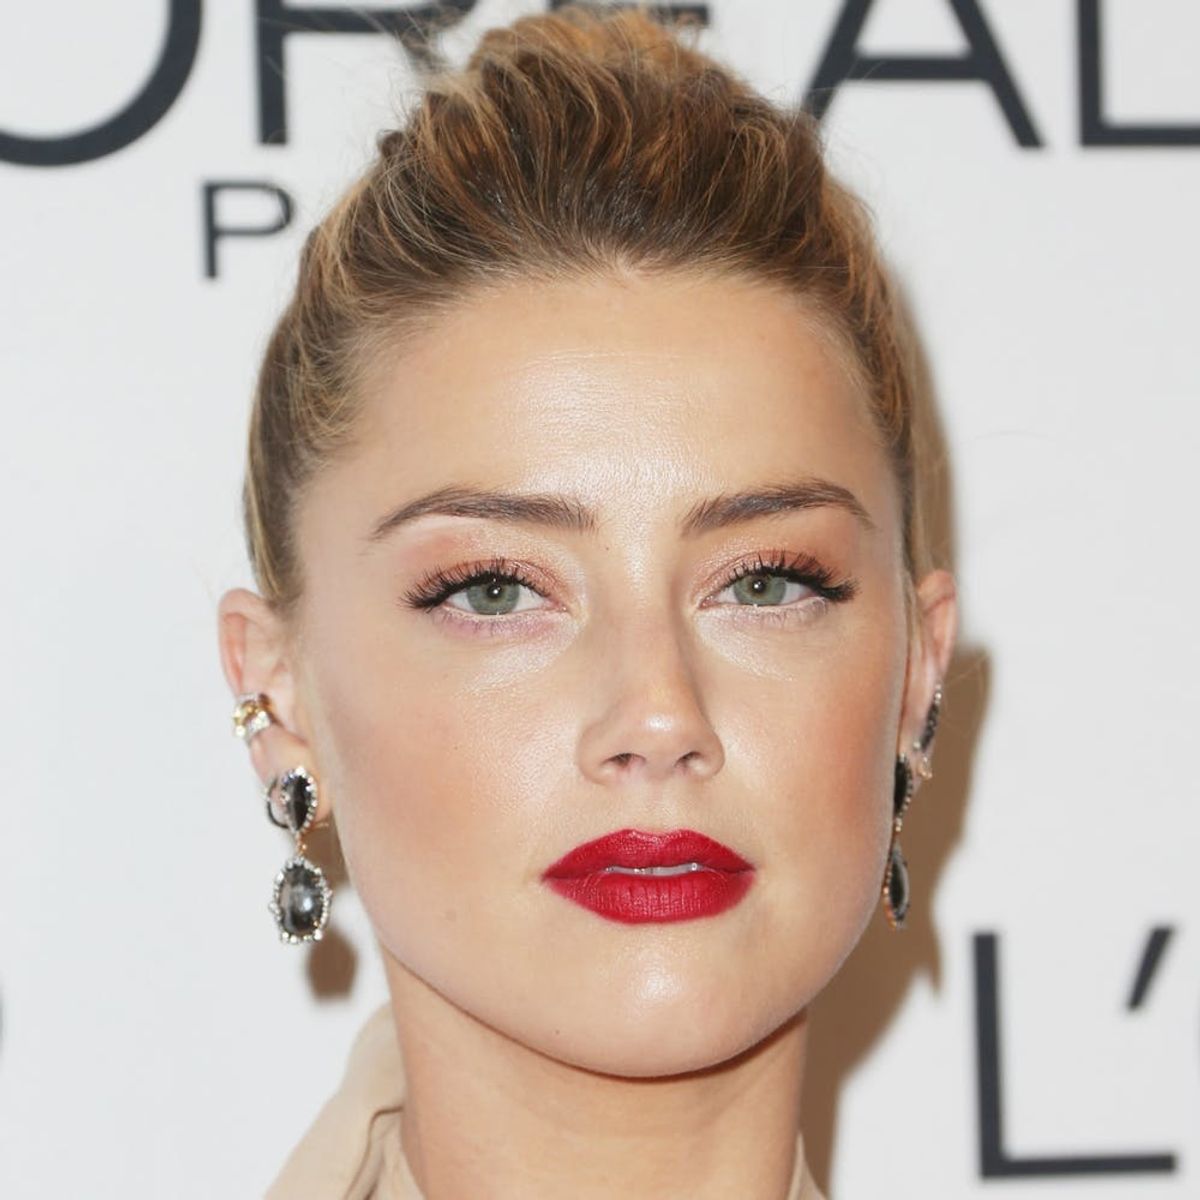 Amber Heard Wants to Help Victims of Domestic Violence Find Their Voice With This New PSA